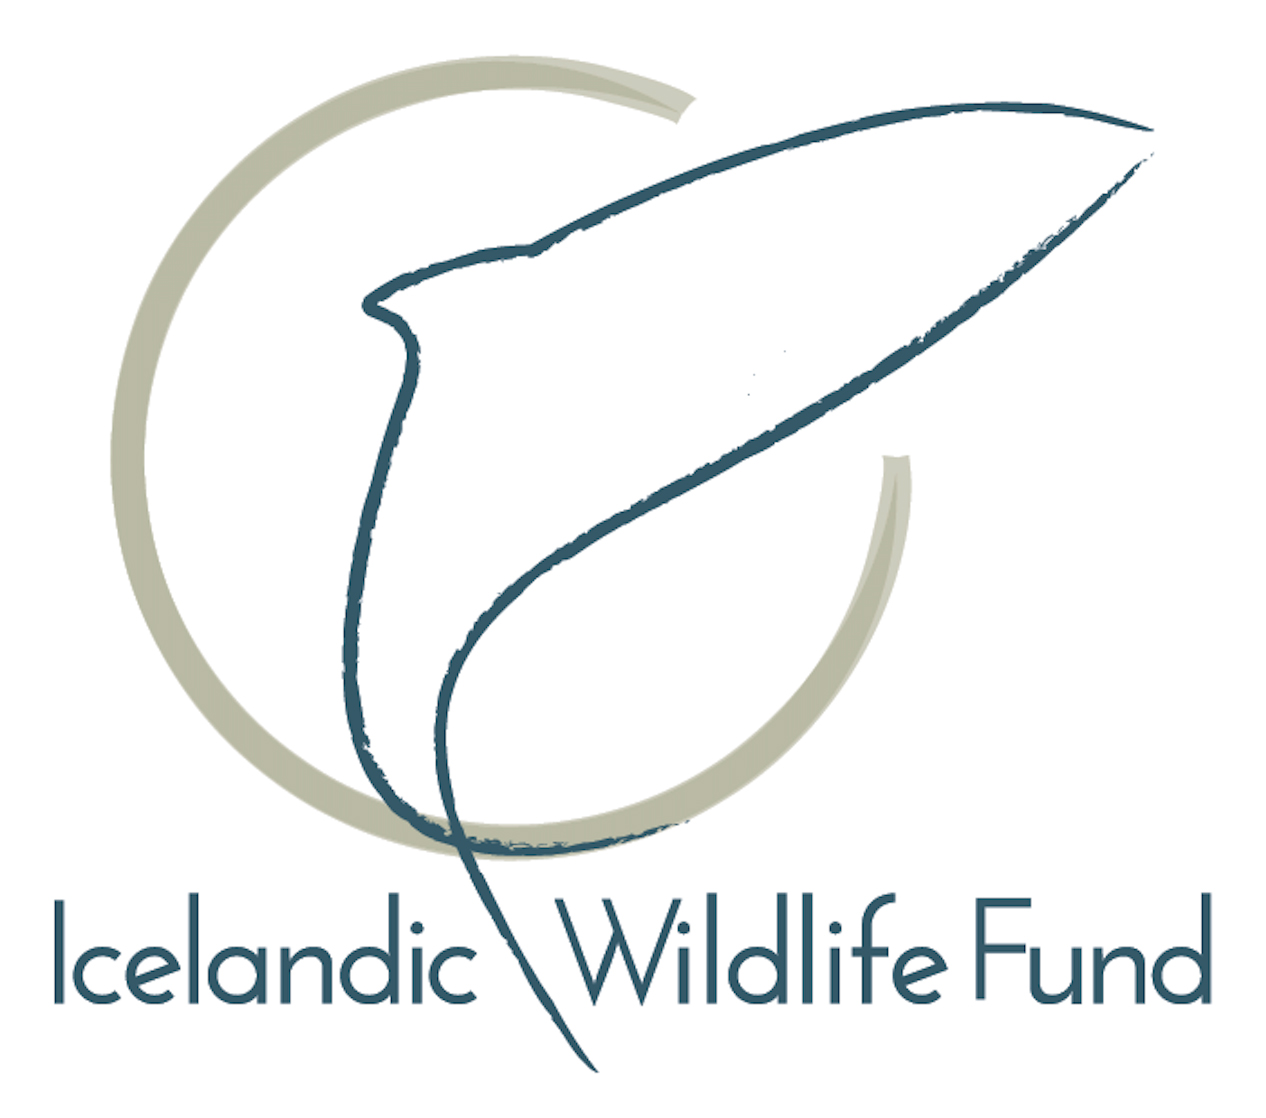 The mission of the Icelandic Wildlife Fund